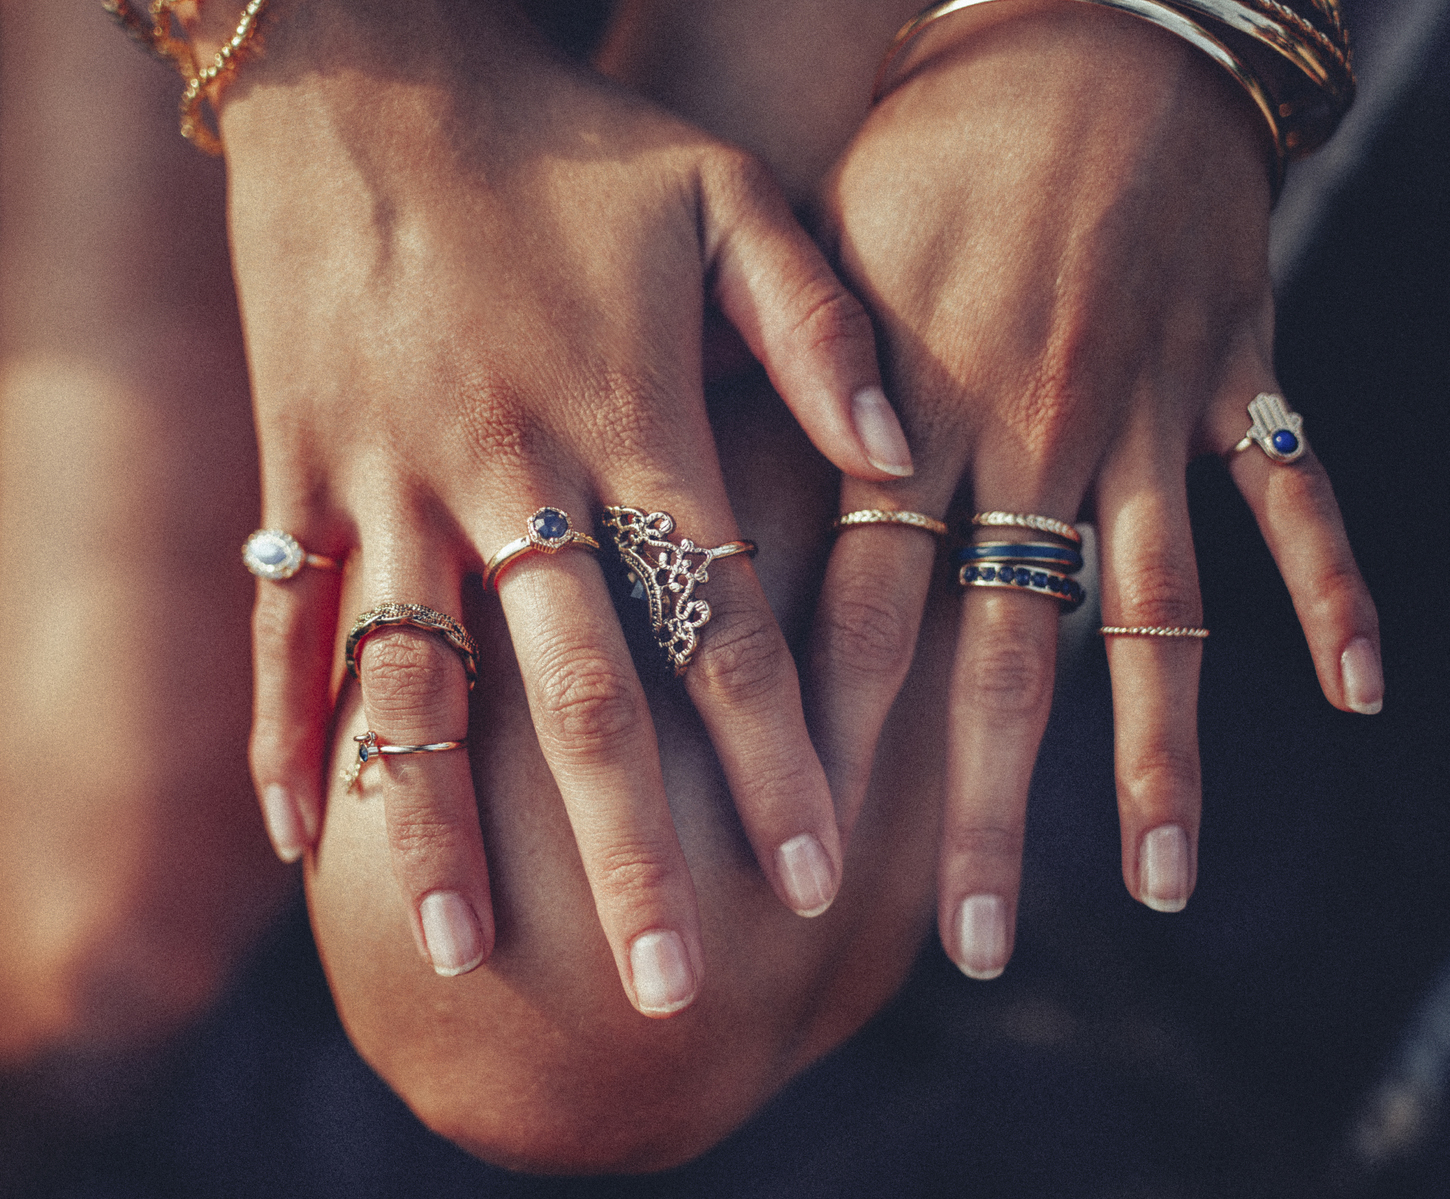 🖐 Can We Guess If You’re Left or Right-Handed? Boho girl's hands looking feminine with many rings